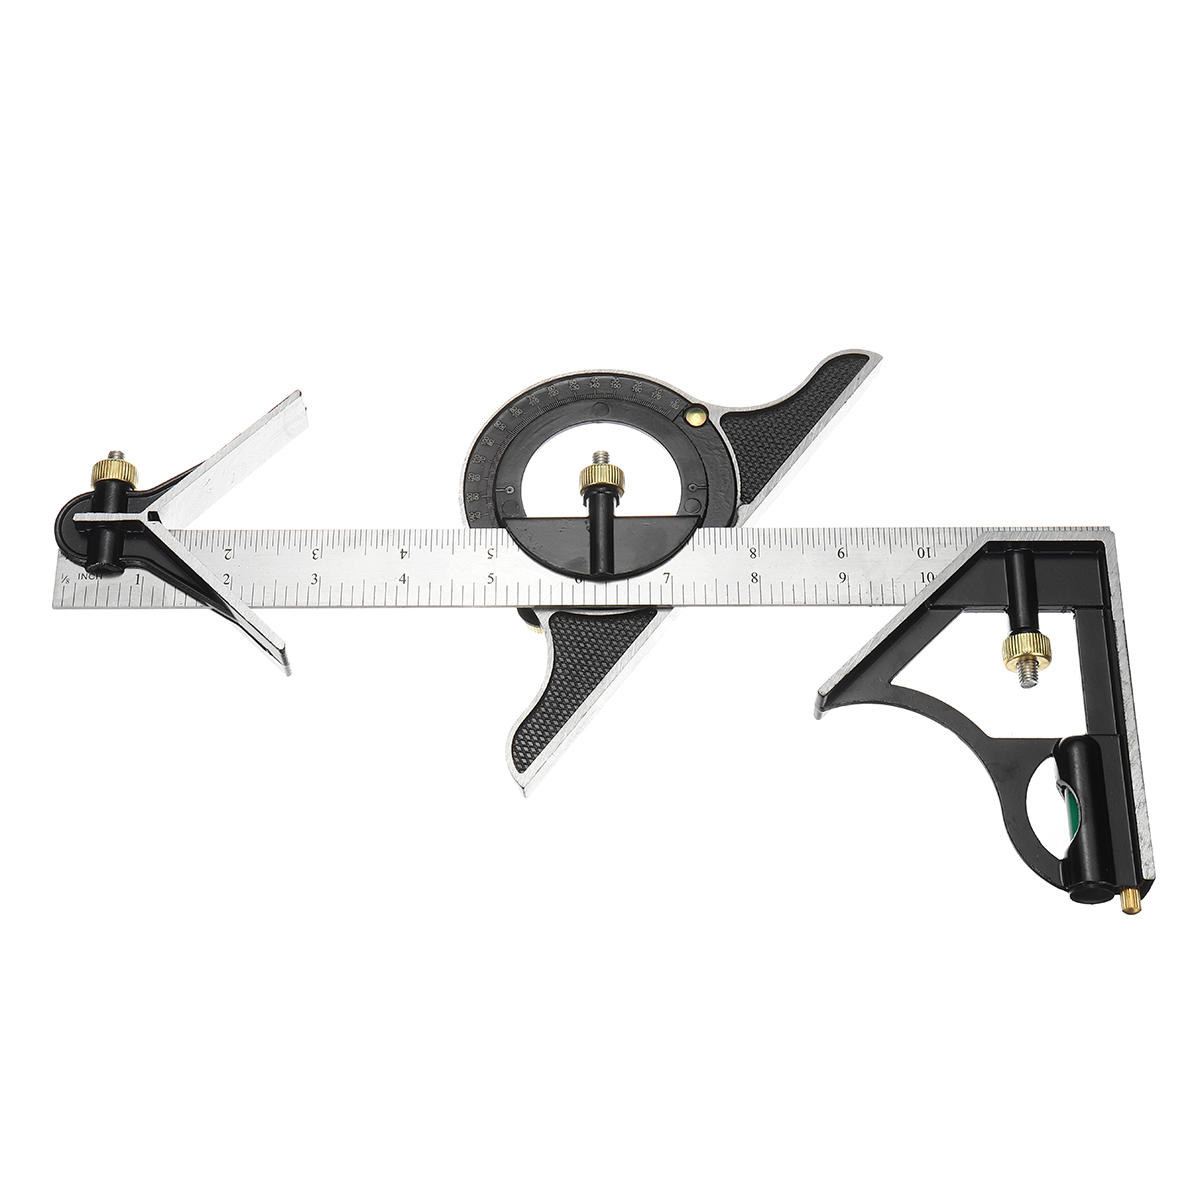 

300mm Combination Square Angle Ruler Adjustable Stainless Steel Angle Ruler